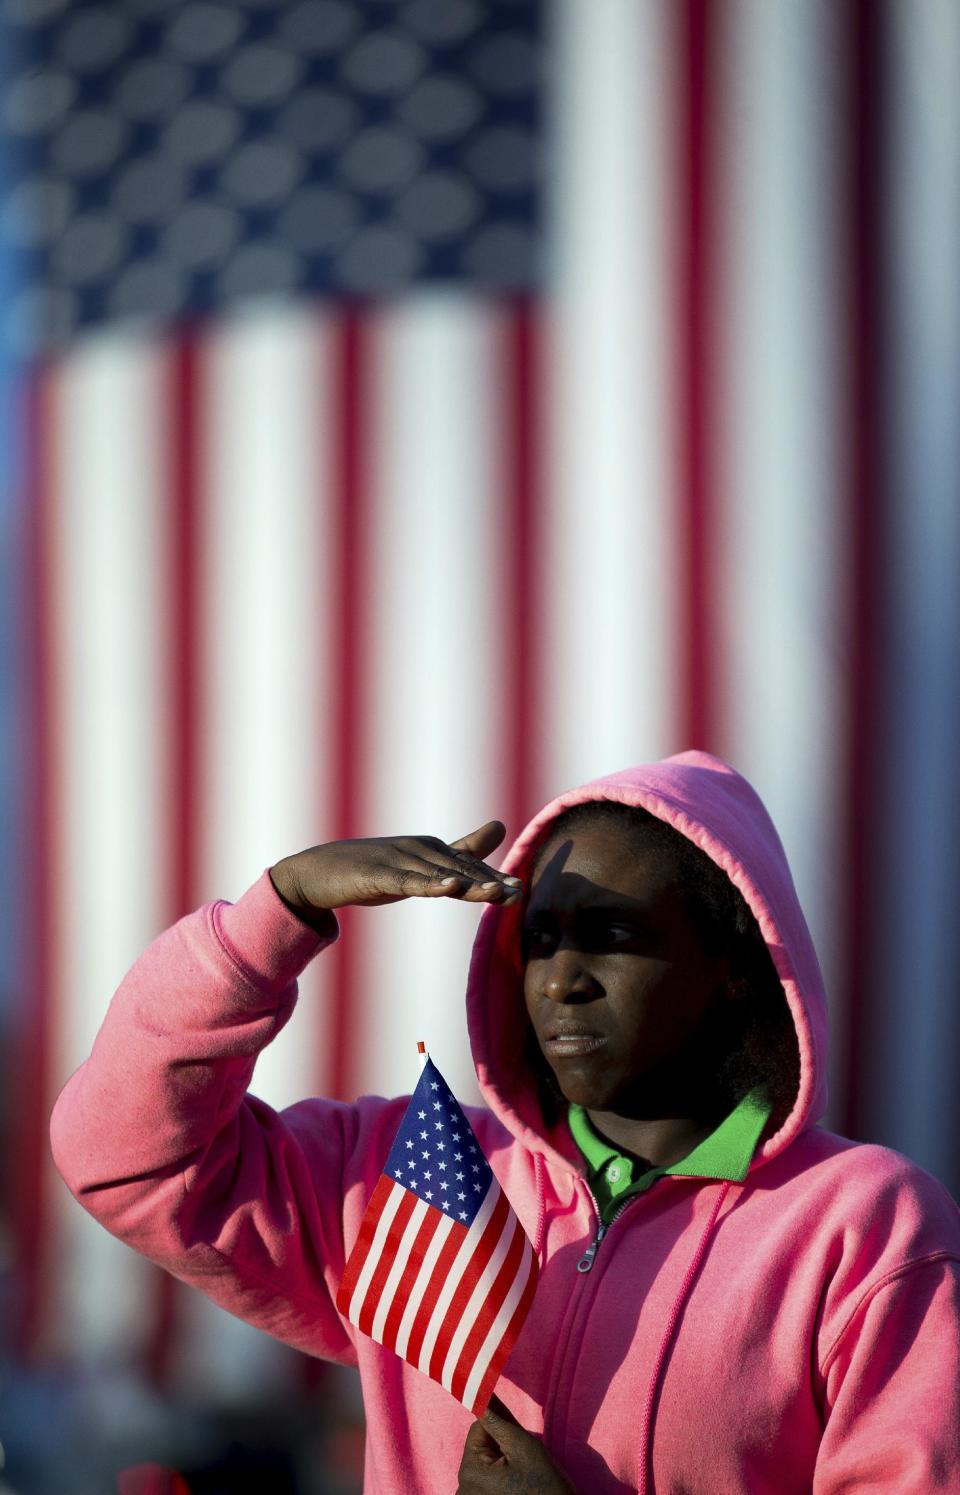 Felicia Walker watches the funeral of Americus Police Officer Nicholas Smarr across the street from Oak Grove Cemetery, Sunday, Dec. 11, 2016, in Americus, Ga. Smarr and his lifelong friend, Georgia Southwestern State University campus police officer Jody Smith, were killed responding to a domestic violence call on Wednesday. (AP Photo/Branden Camp)